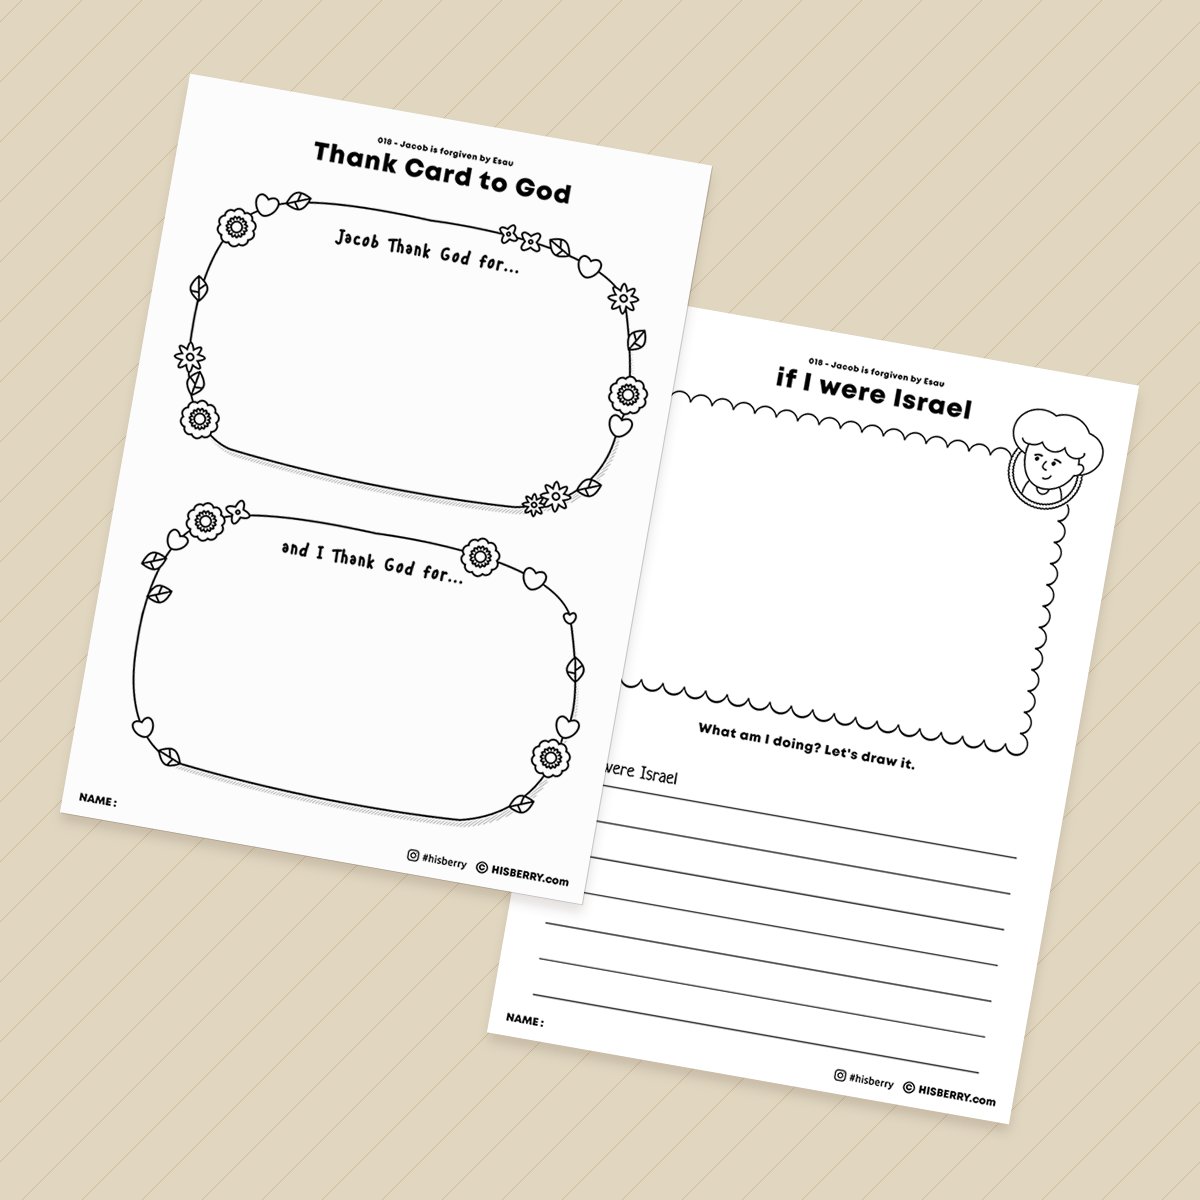 Jacob is forgiven by Esau - Bible Verse Activity Worksheets